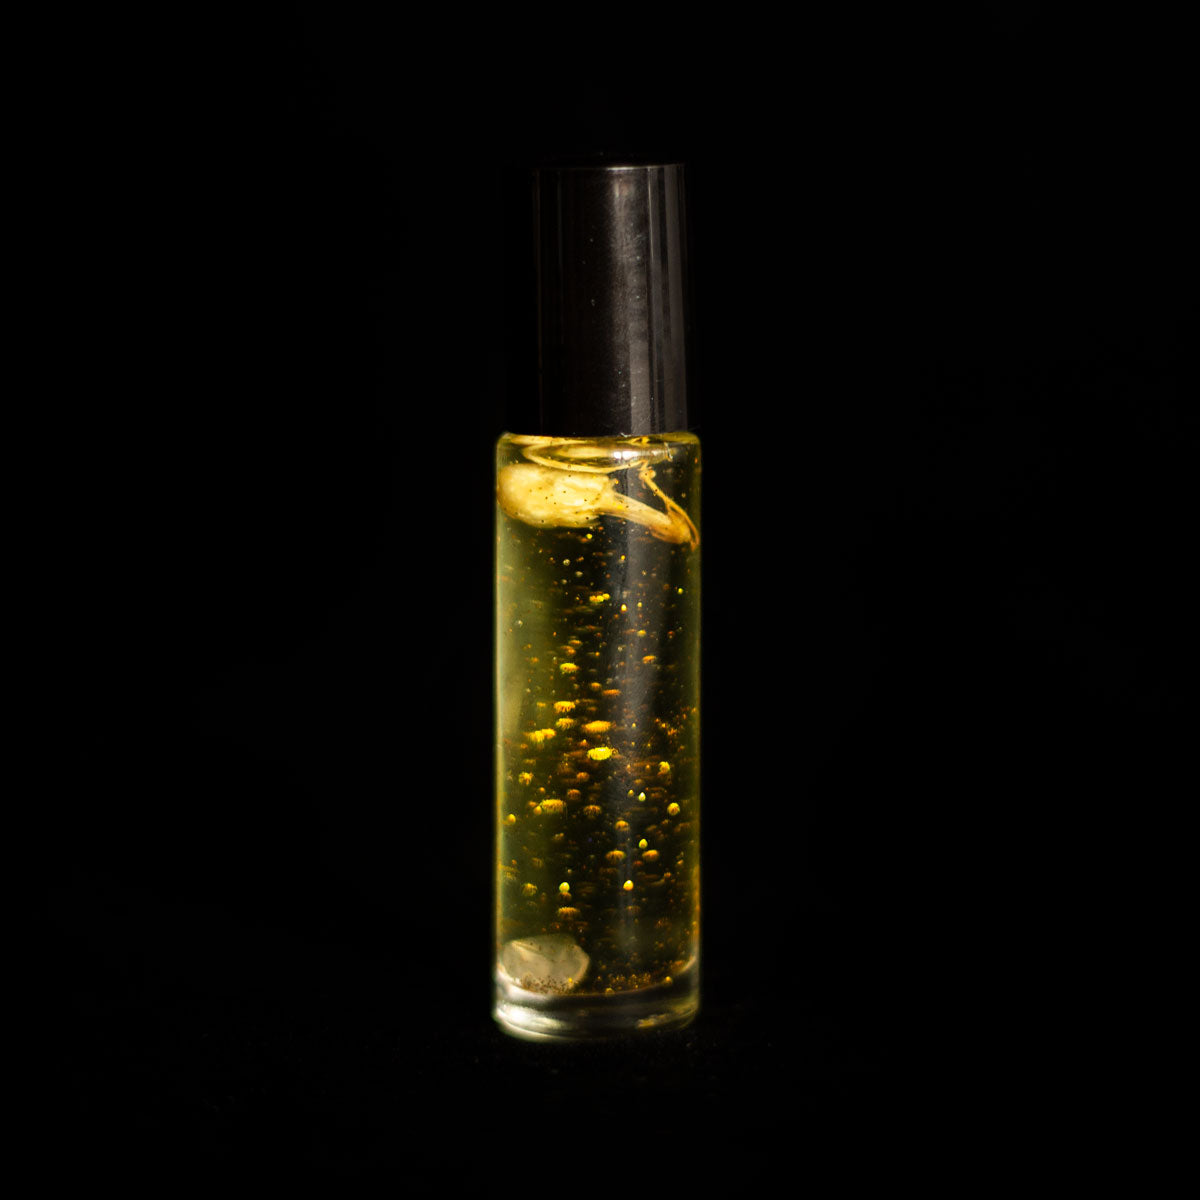 A perfume vial filled with pale yellow oil, containing a jasmine flower, a small rose quartz crystal chip, and bio-glitter